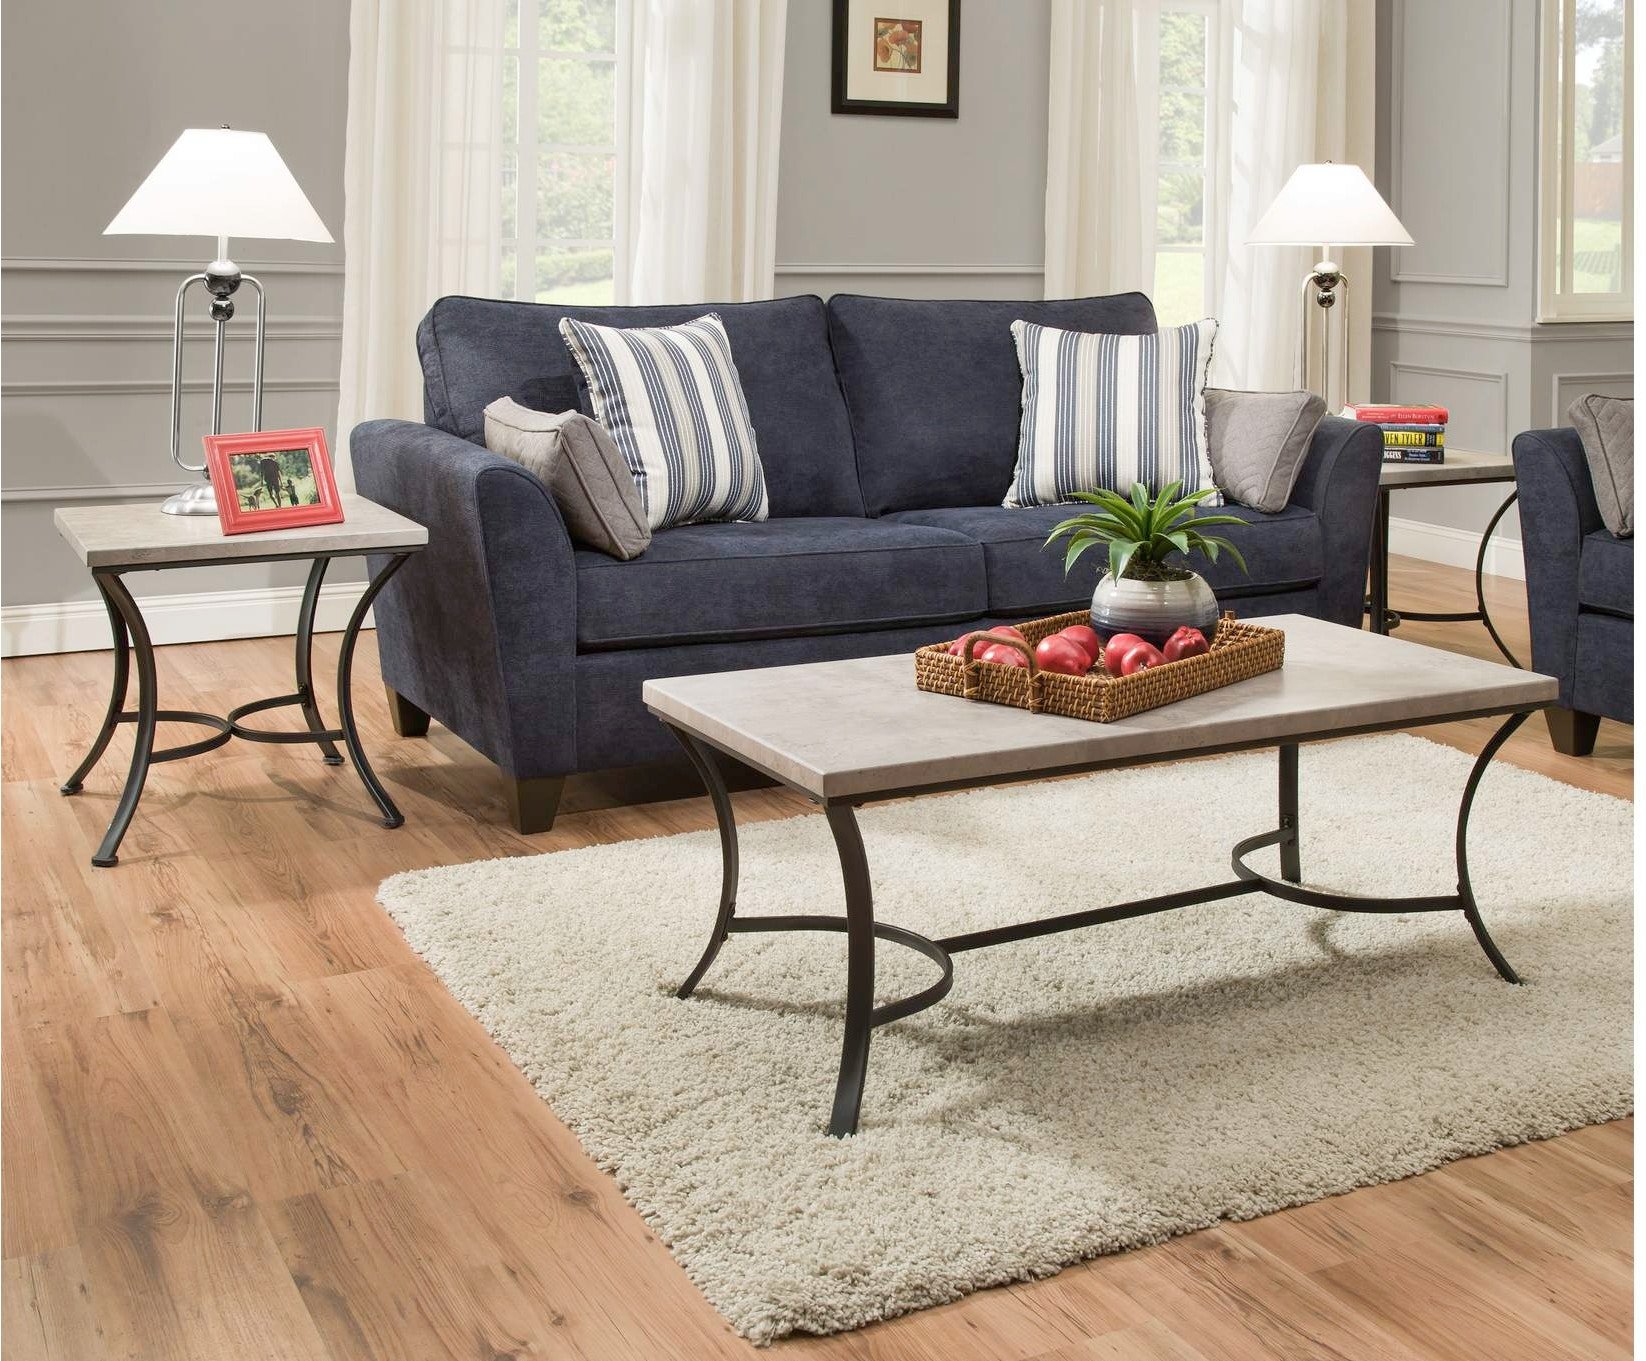 coffee table or end table? what is right for your living room?